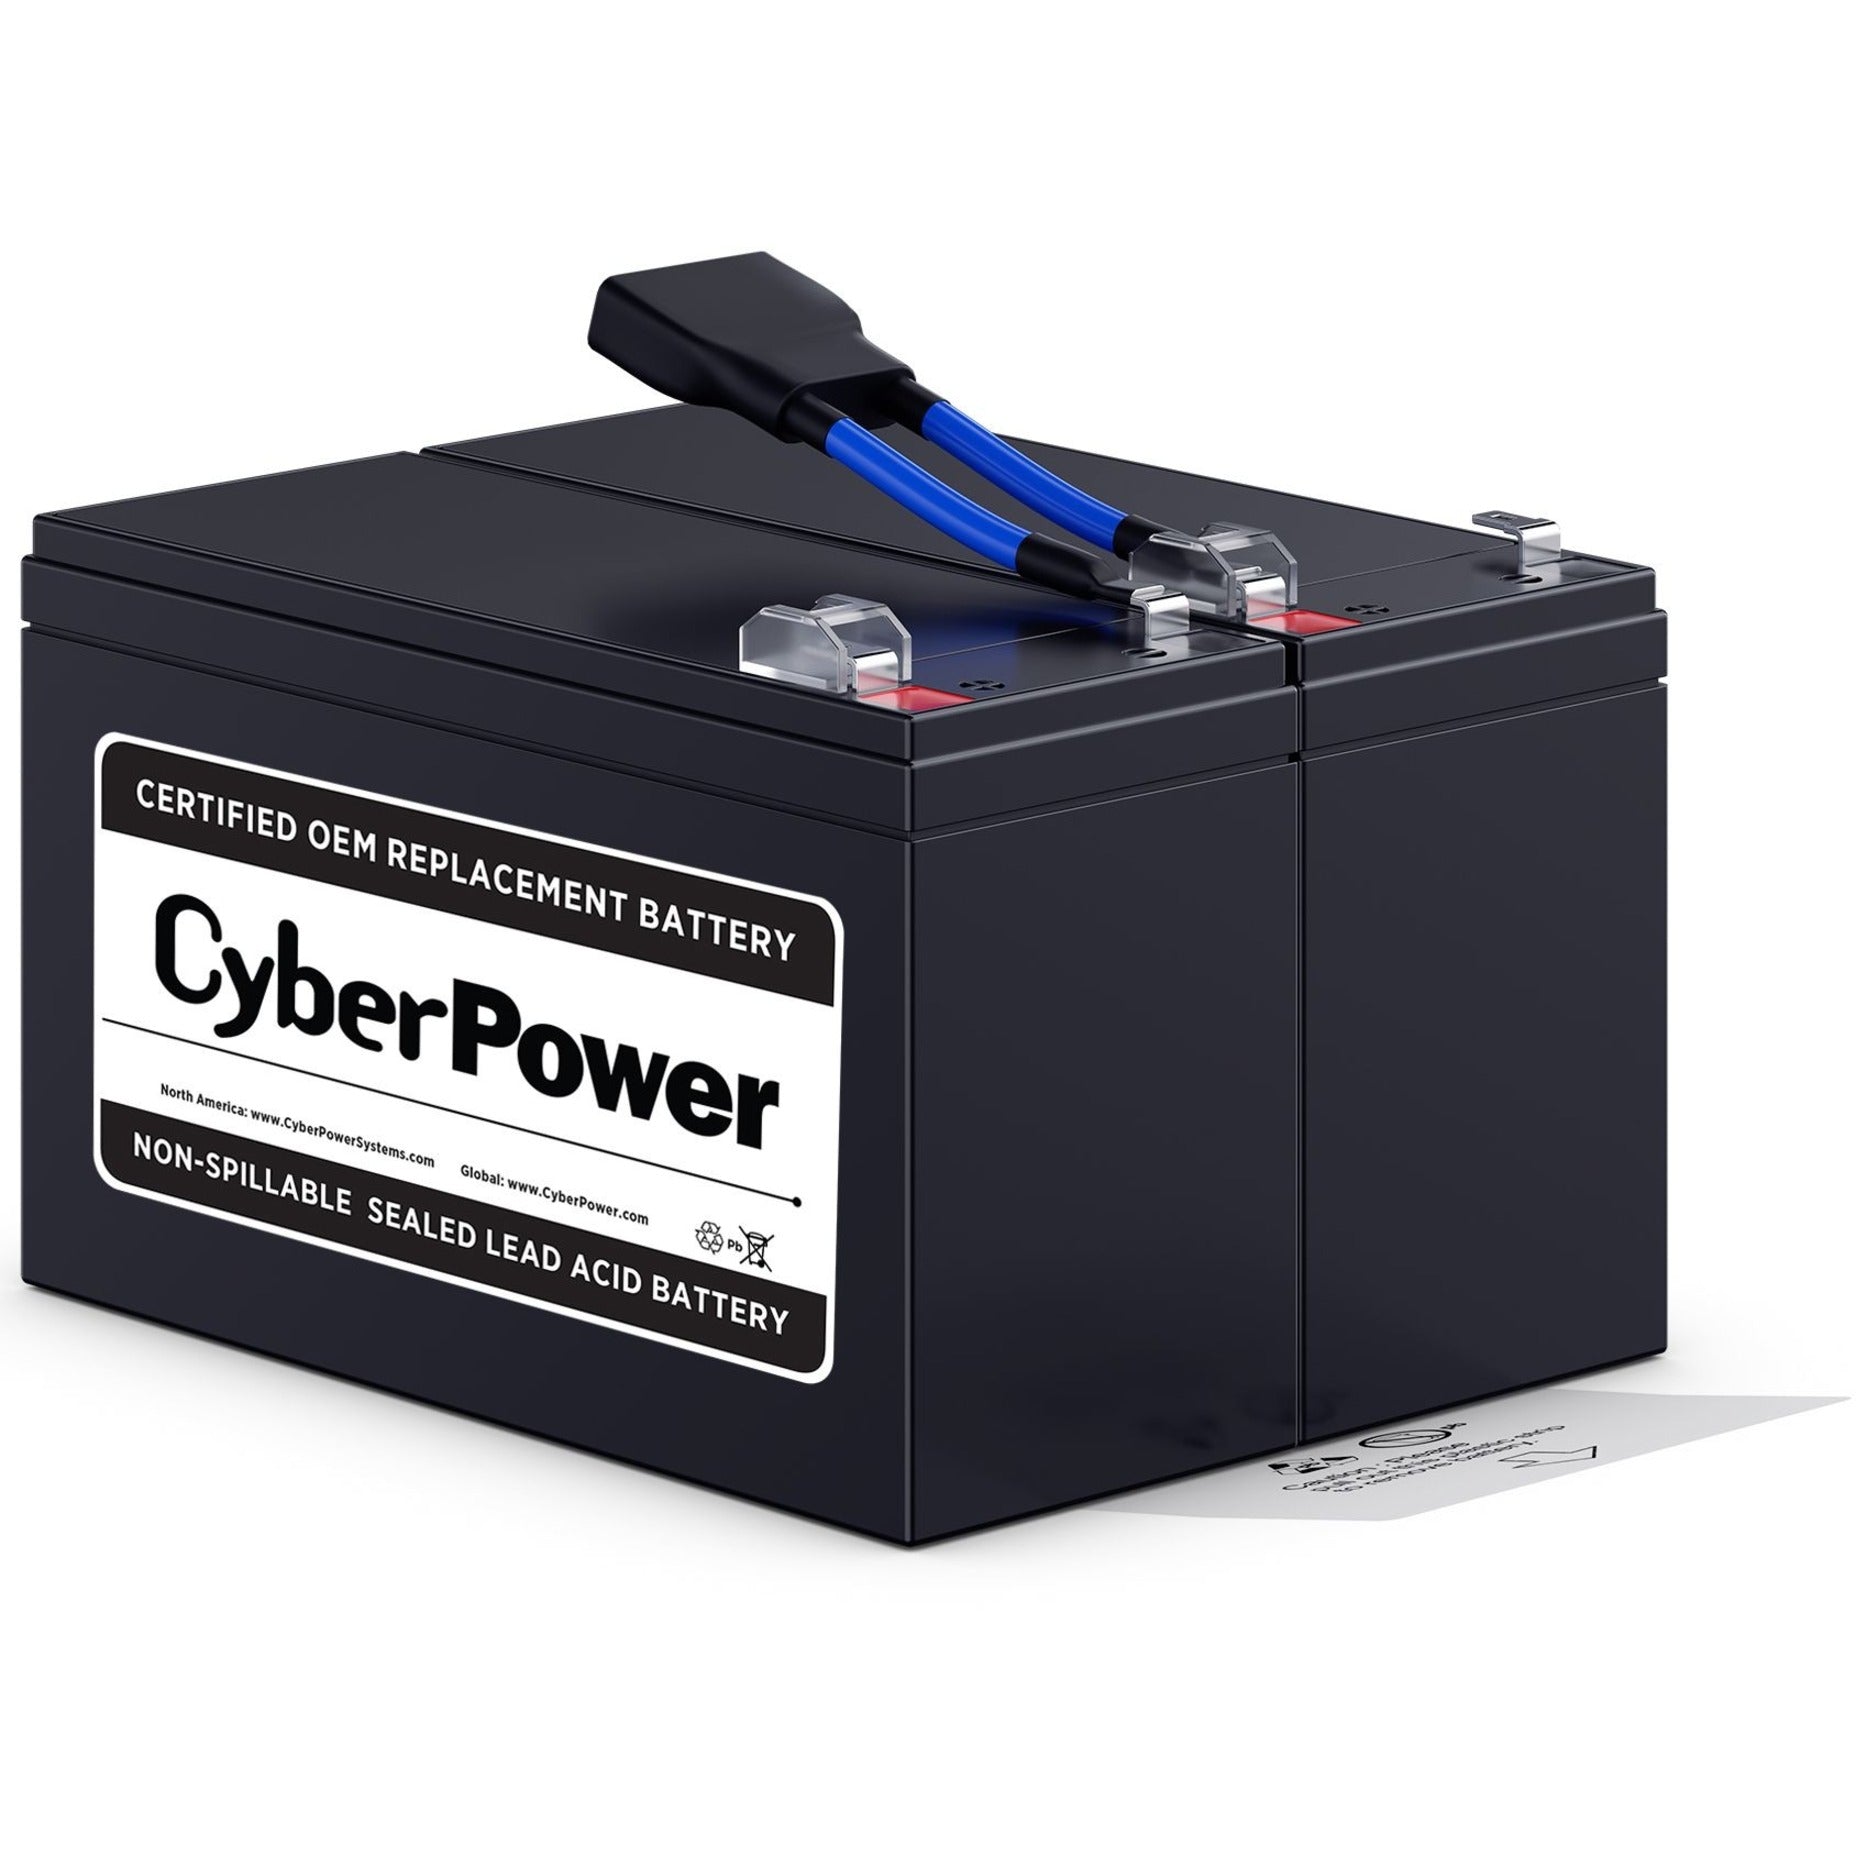 CyberPower RB1290X2B Replacement Battery Kit, 12V DC, 9000mAh, Lead Acid, Leak Proof